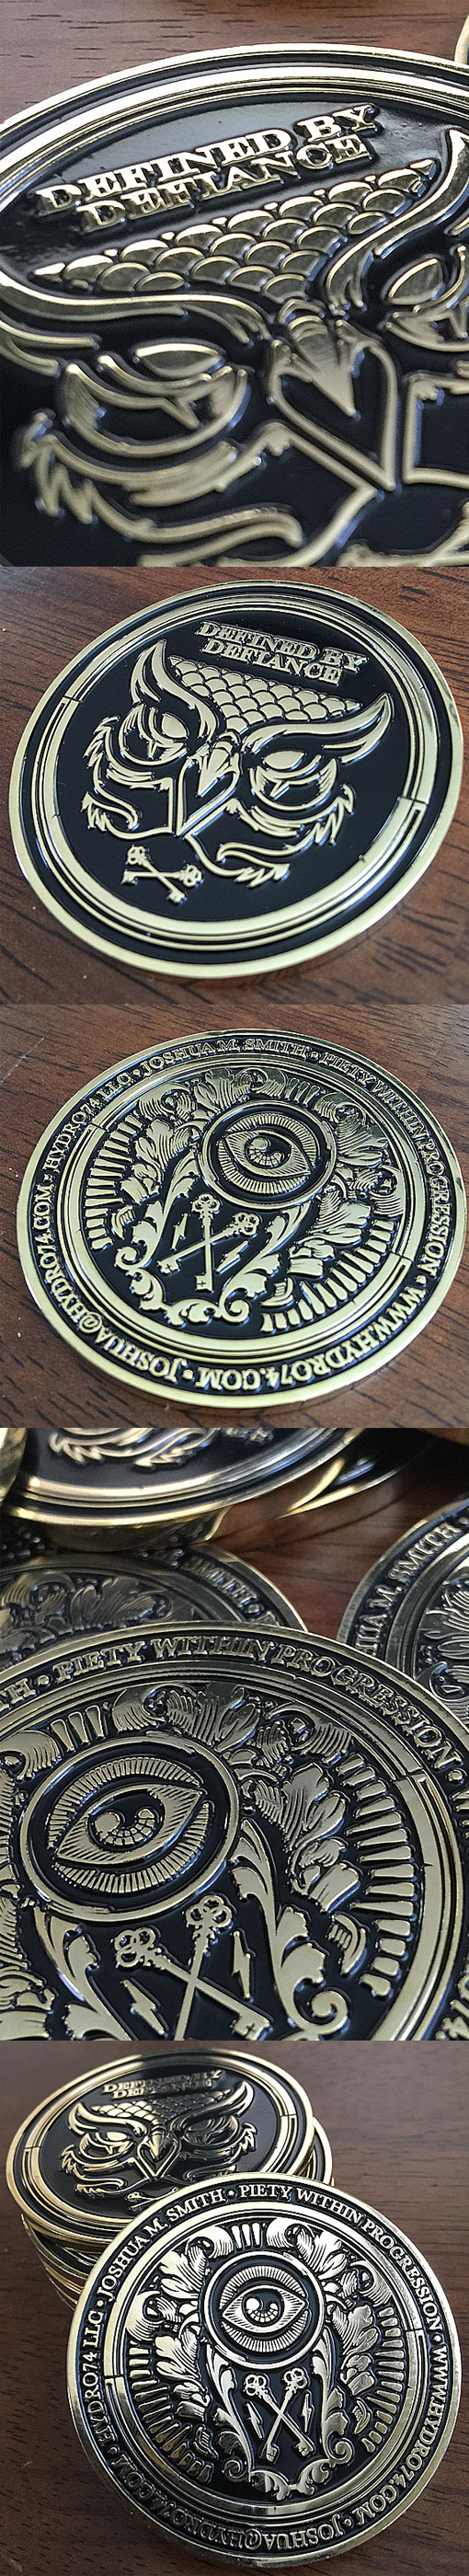 Amazing Metal Coin Business Card Design